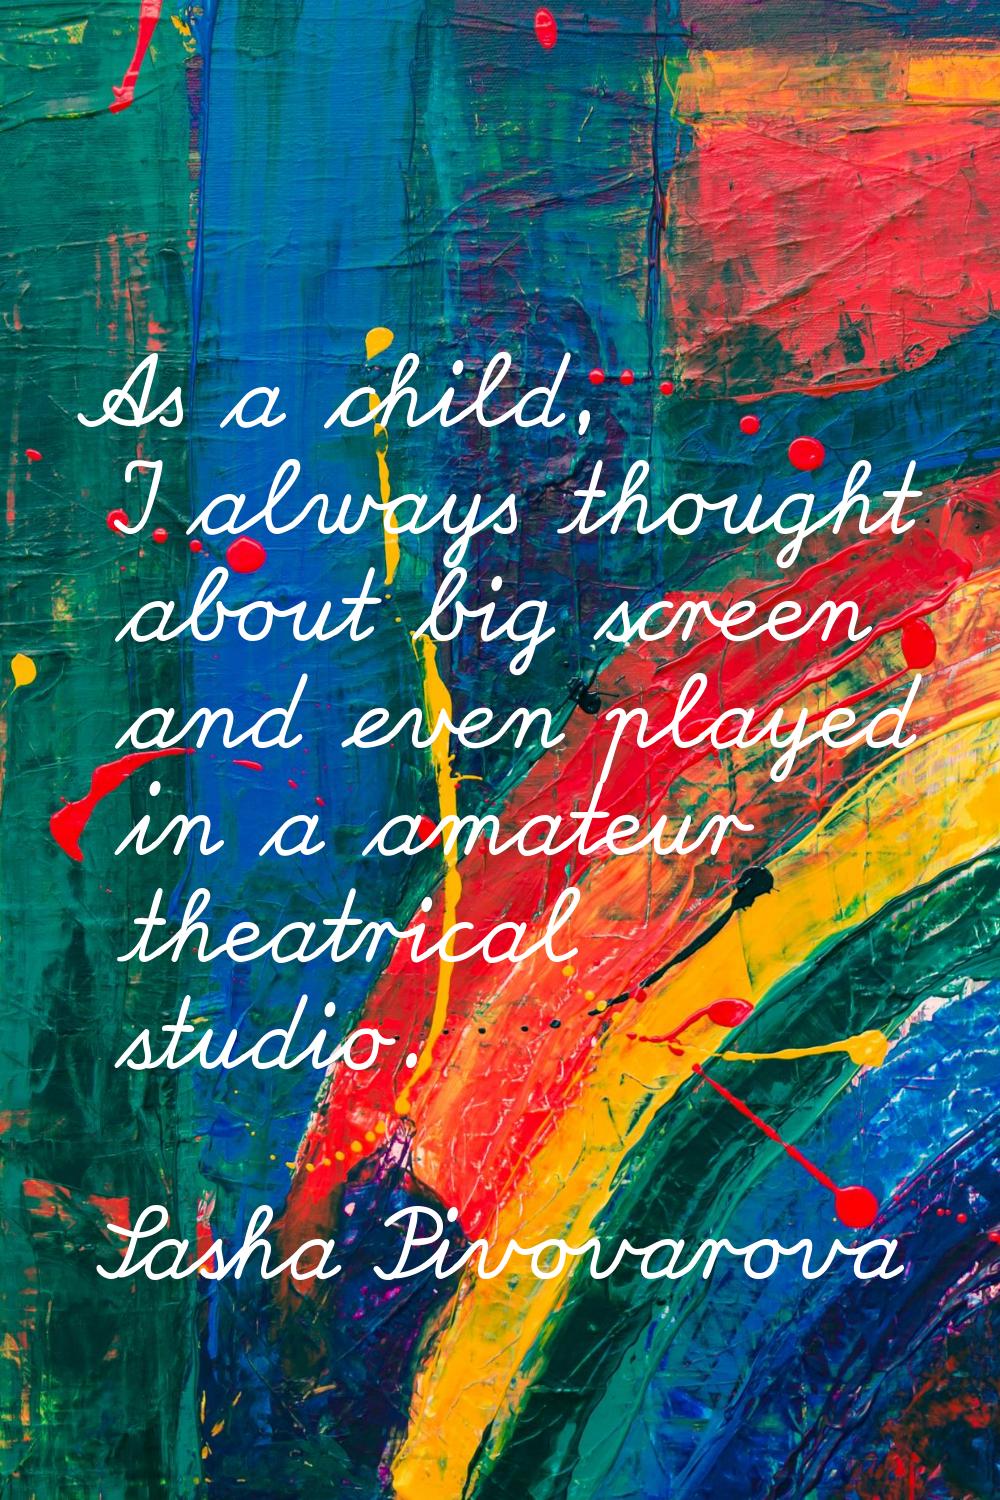 As a child, I always thought about big screen and even played in a amateur theatrical studio.